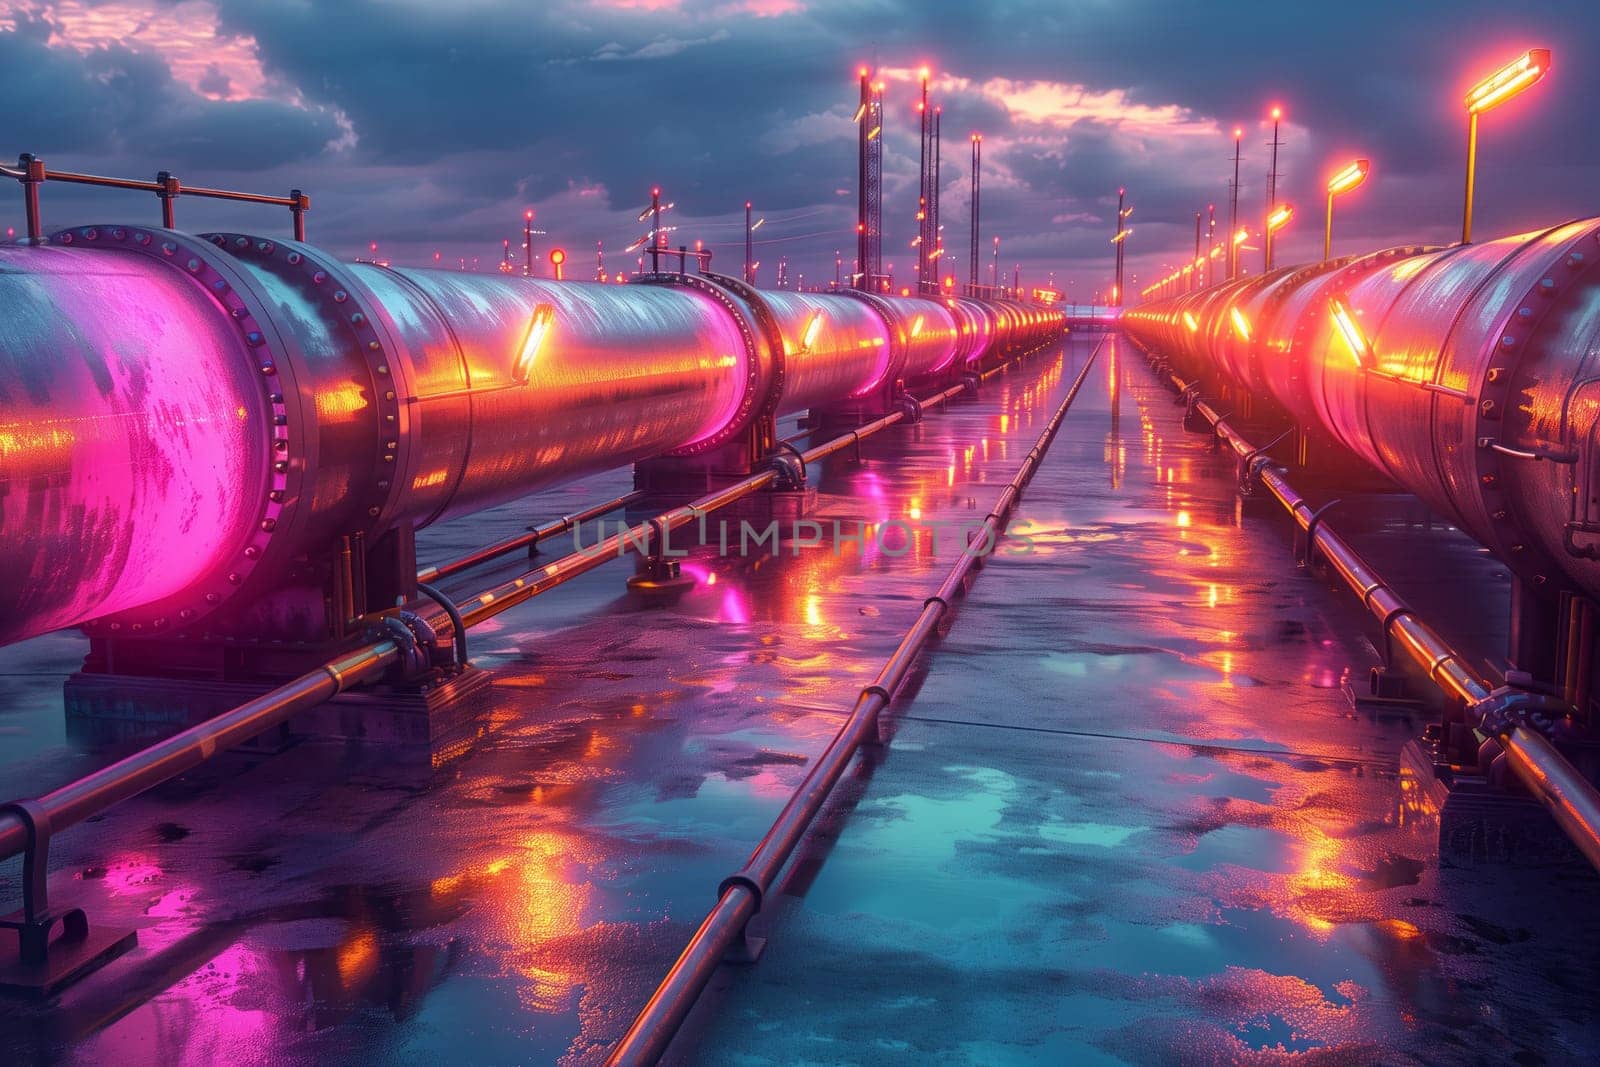 A row of pipes on a bridge at night, against a magenta sky with electric blue clouds. An engineering marvel overlooking the water, perfect for transportation and travel events